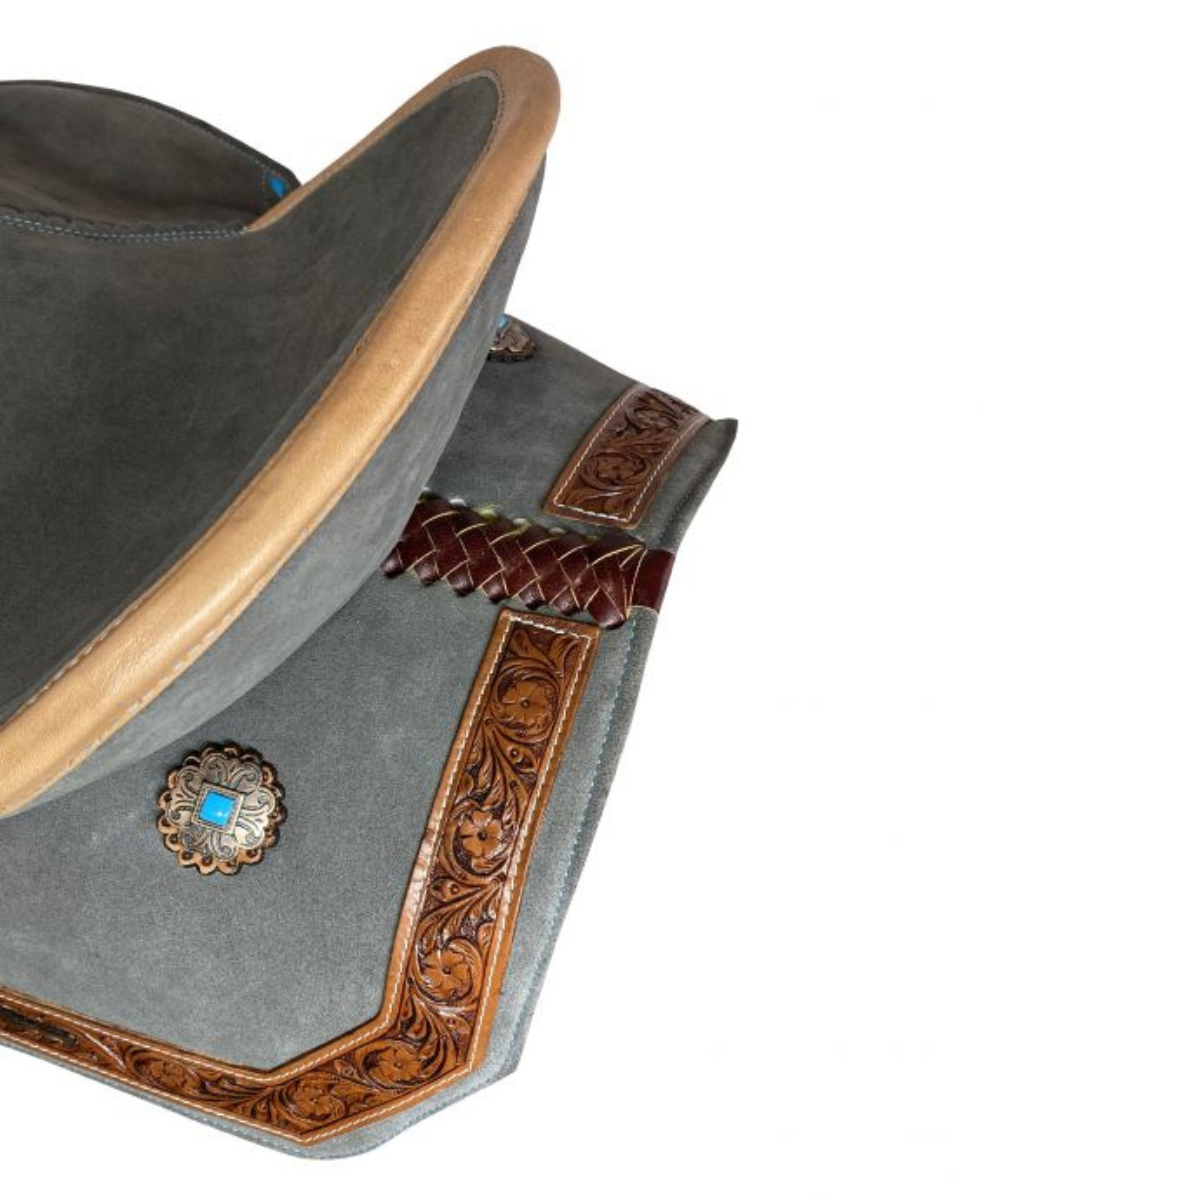 15" Double T Gray Suede Barrel Style Saddle With Teal Buckstitching - Double T Saddles